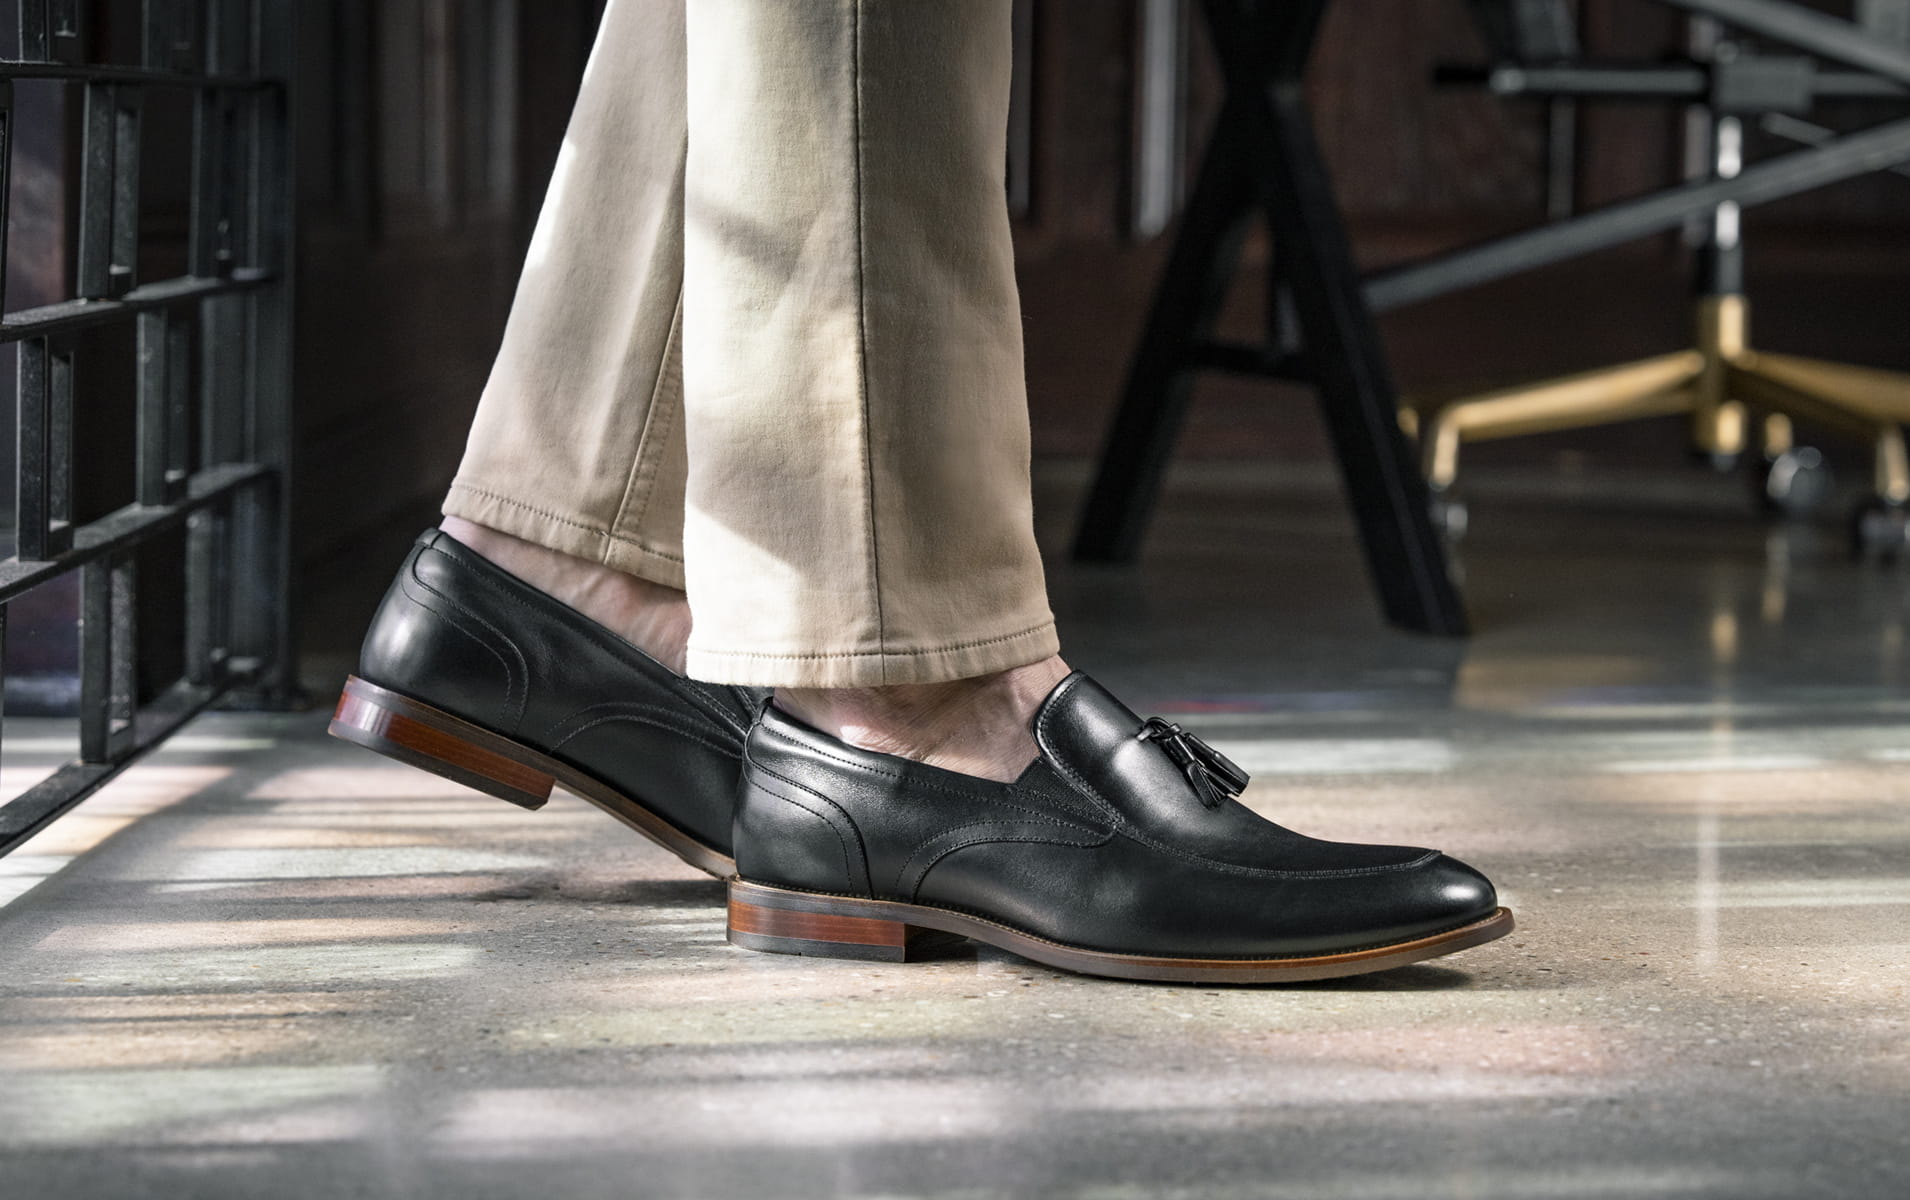 Click to shop Florsheim dress shoes. Image features he Rucci tassel loafer.